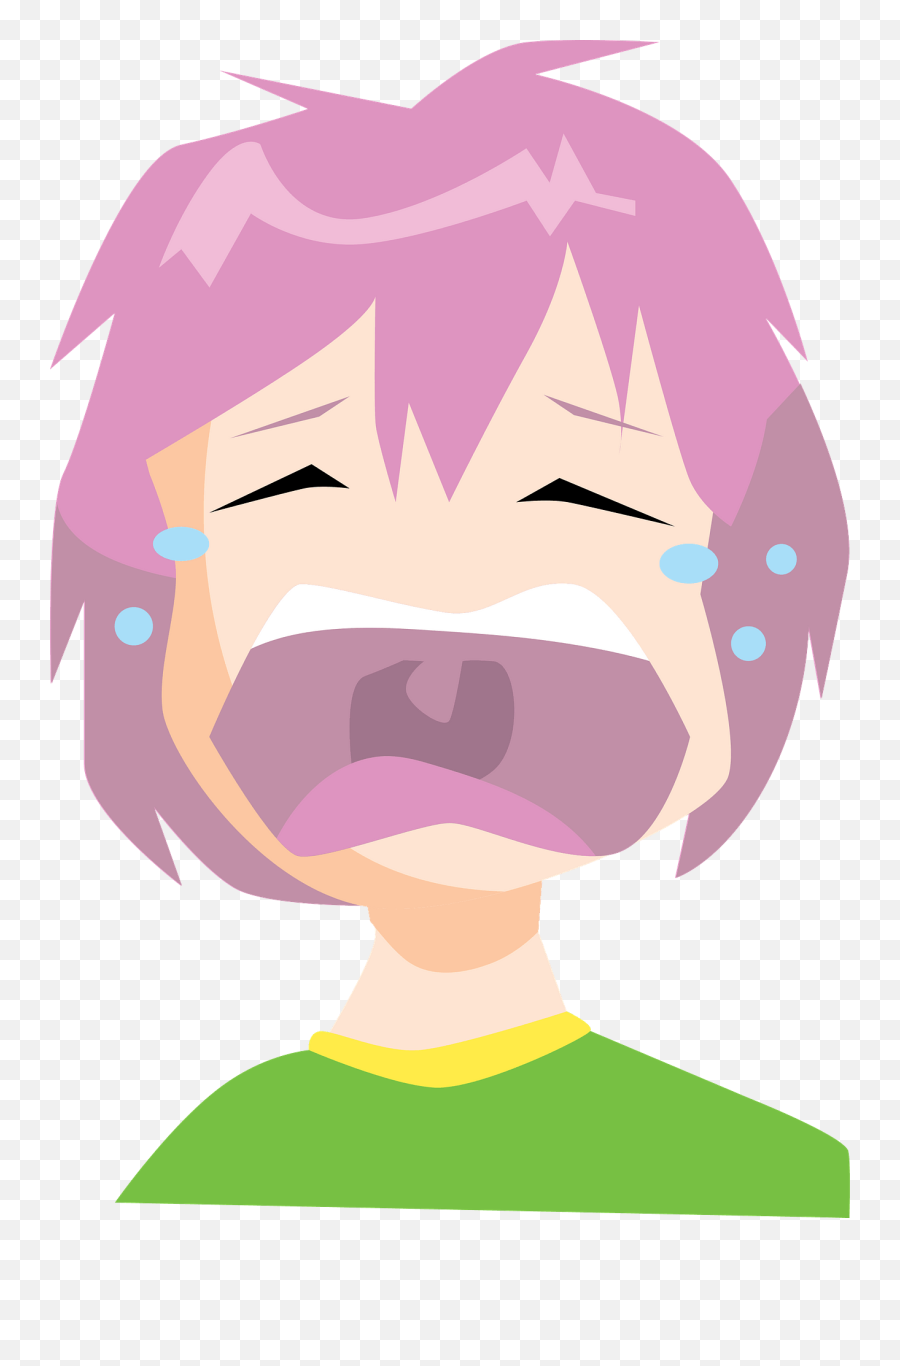 Download Free Png Crying Boy 2 - Dlpngcom Clip Art,Crying Tears Png